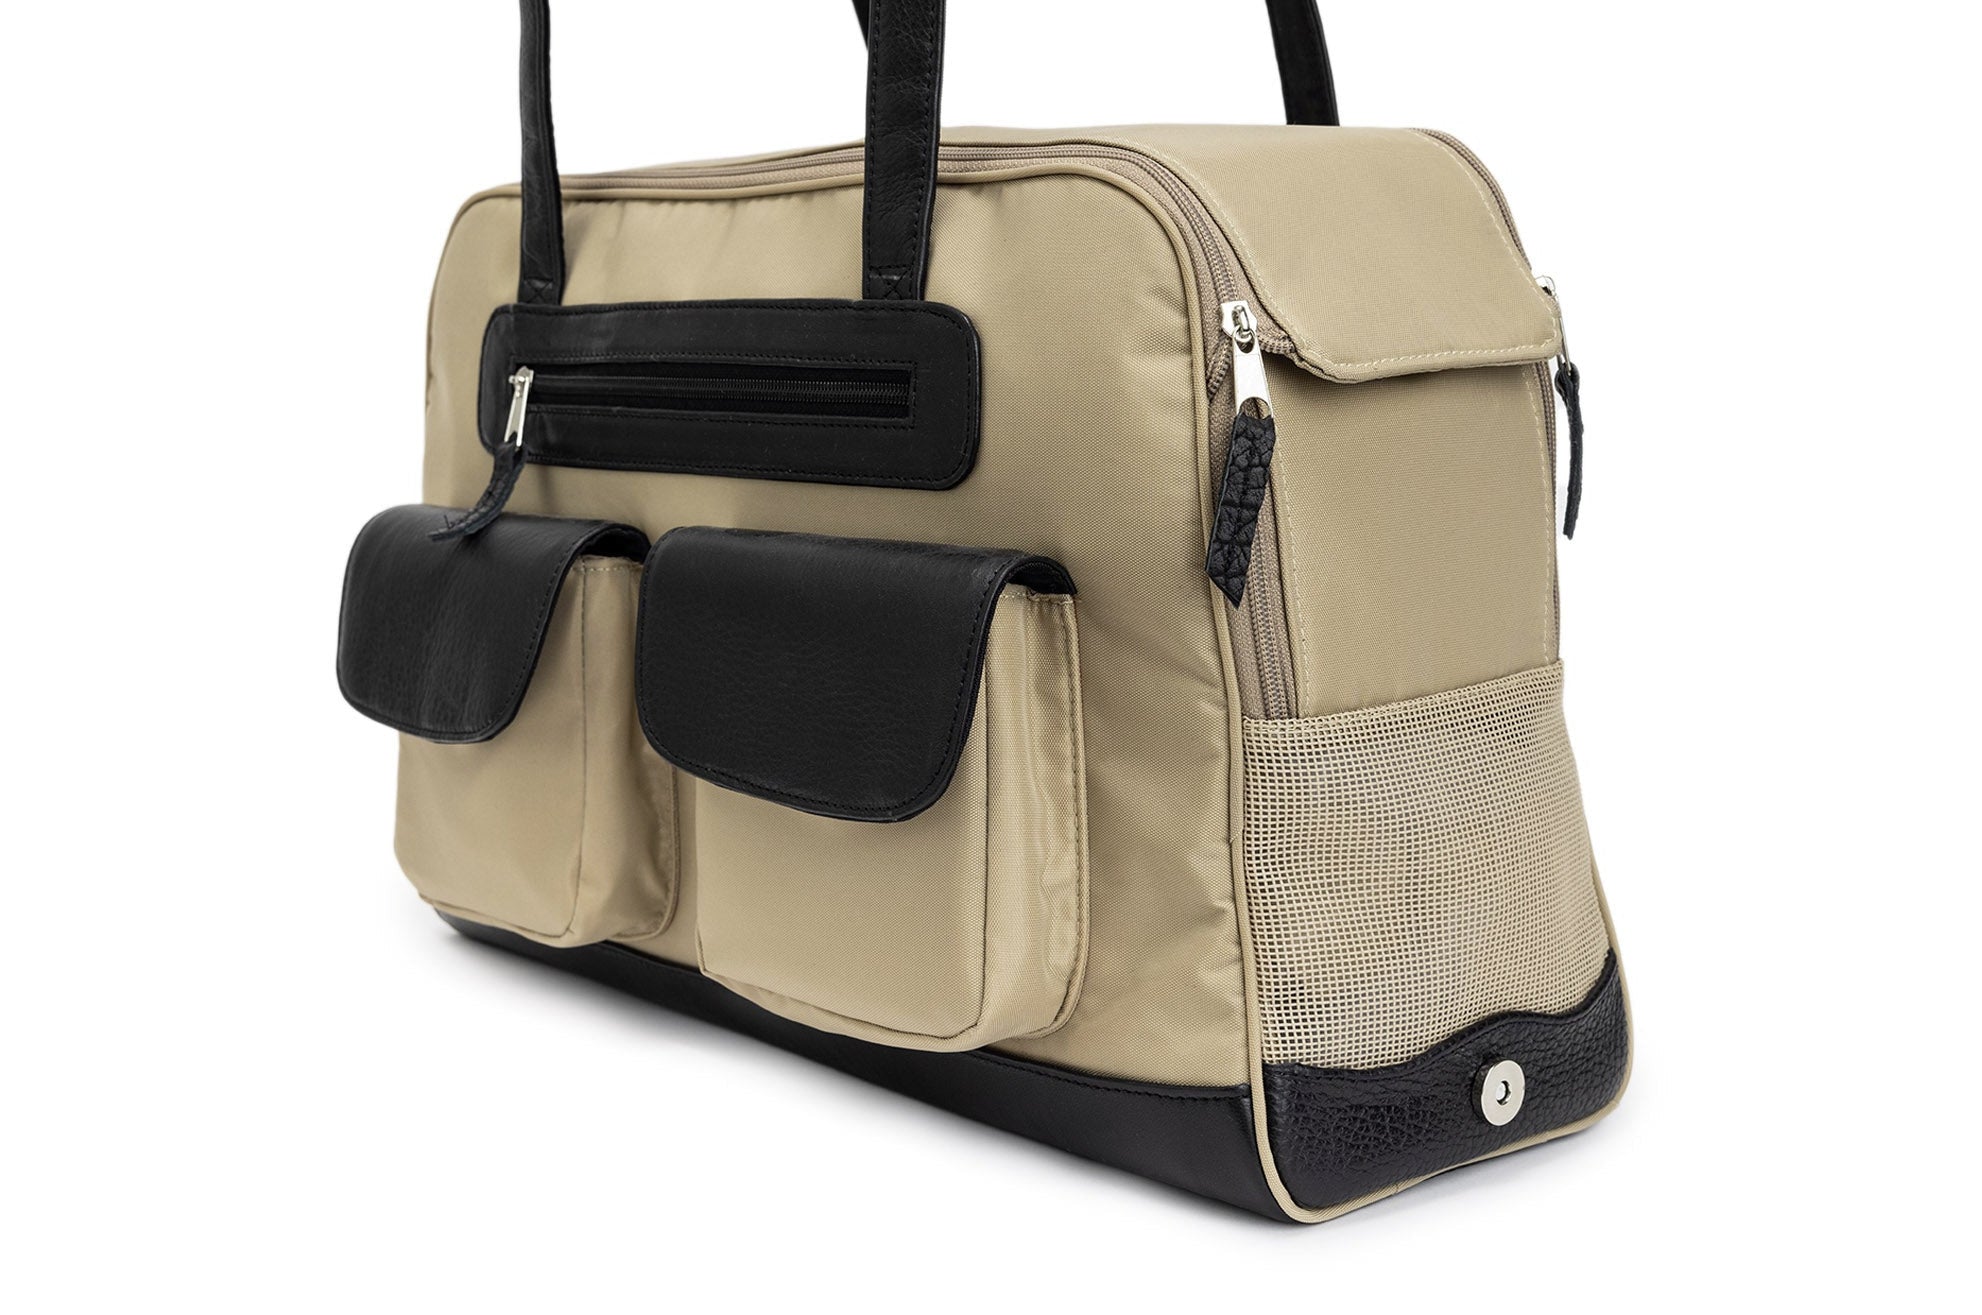 Dog Carrier - Cargo Carrier with Leather Trim - Beige/Black Leather - Beige Nylon